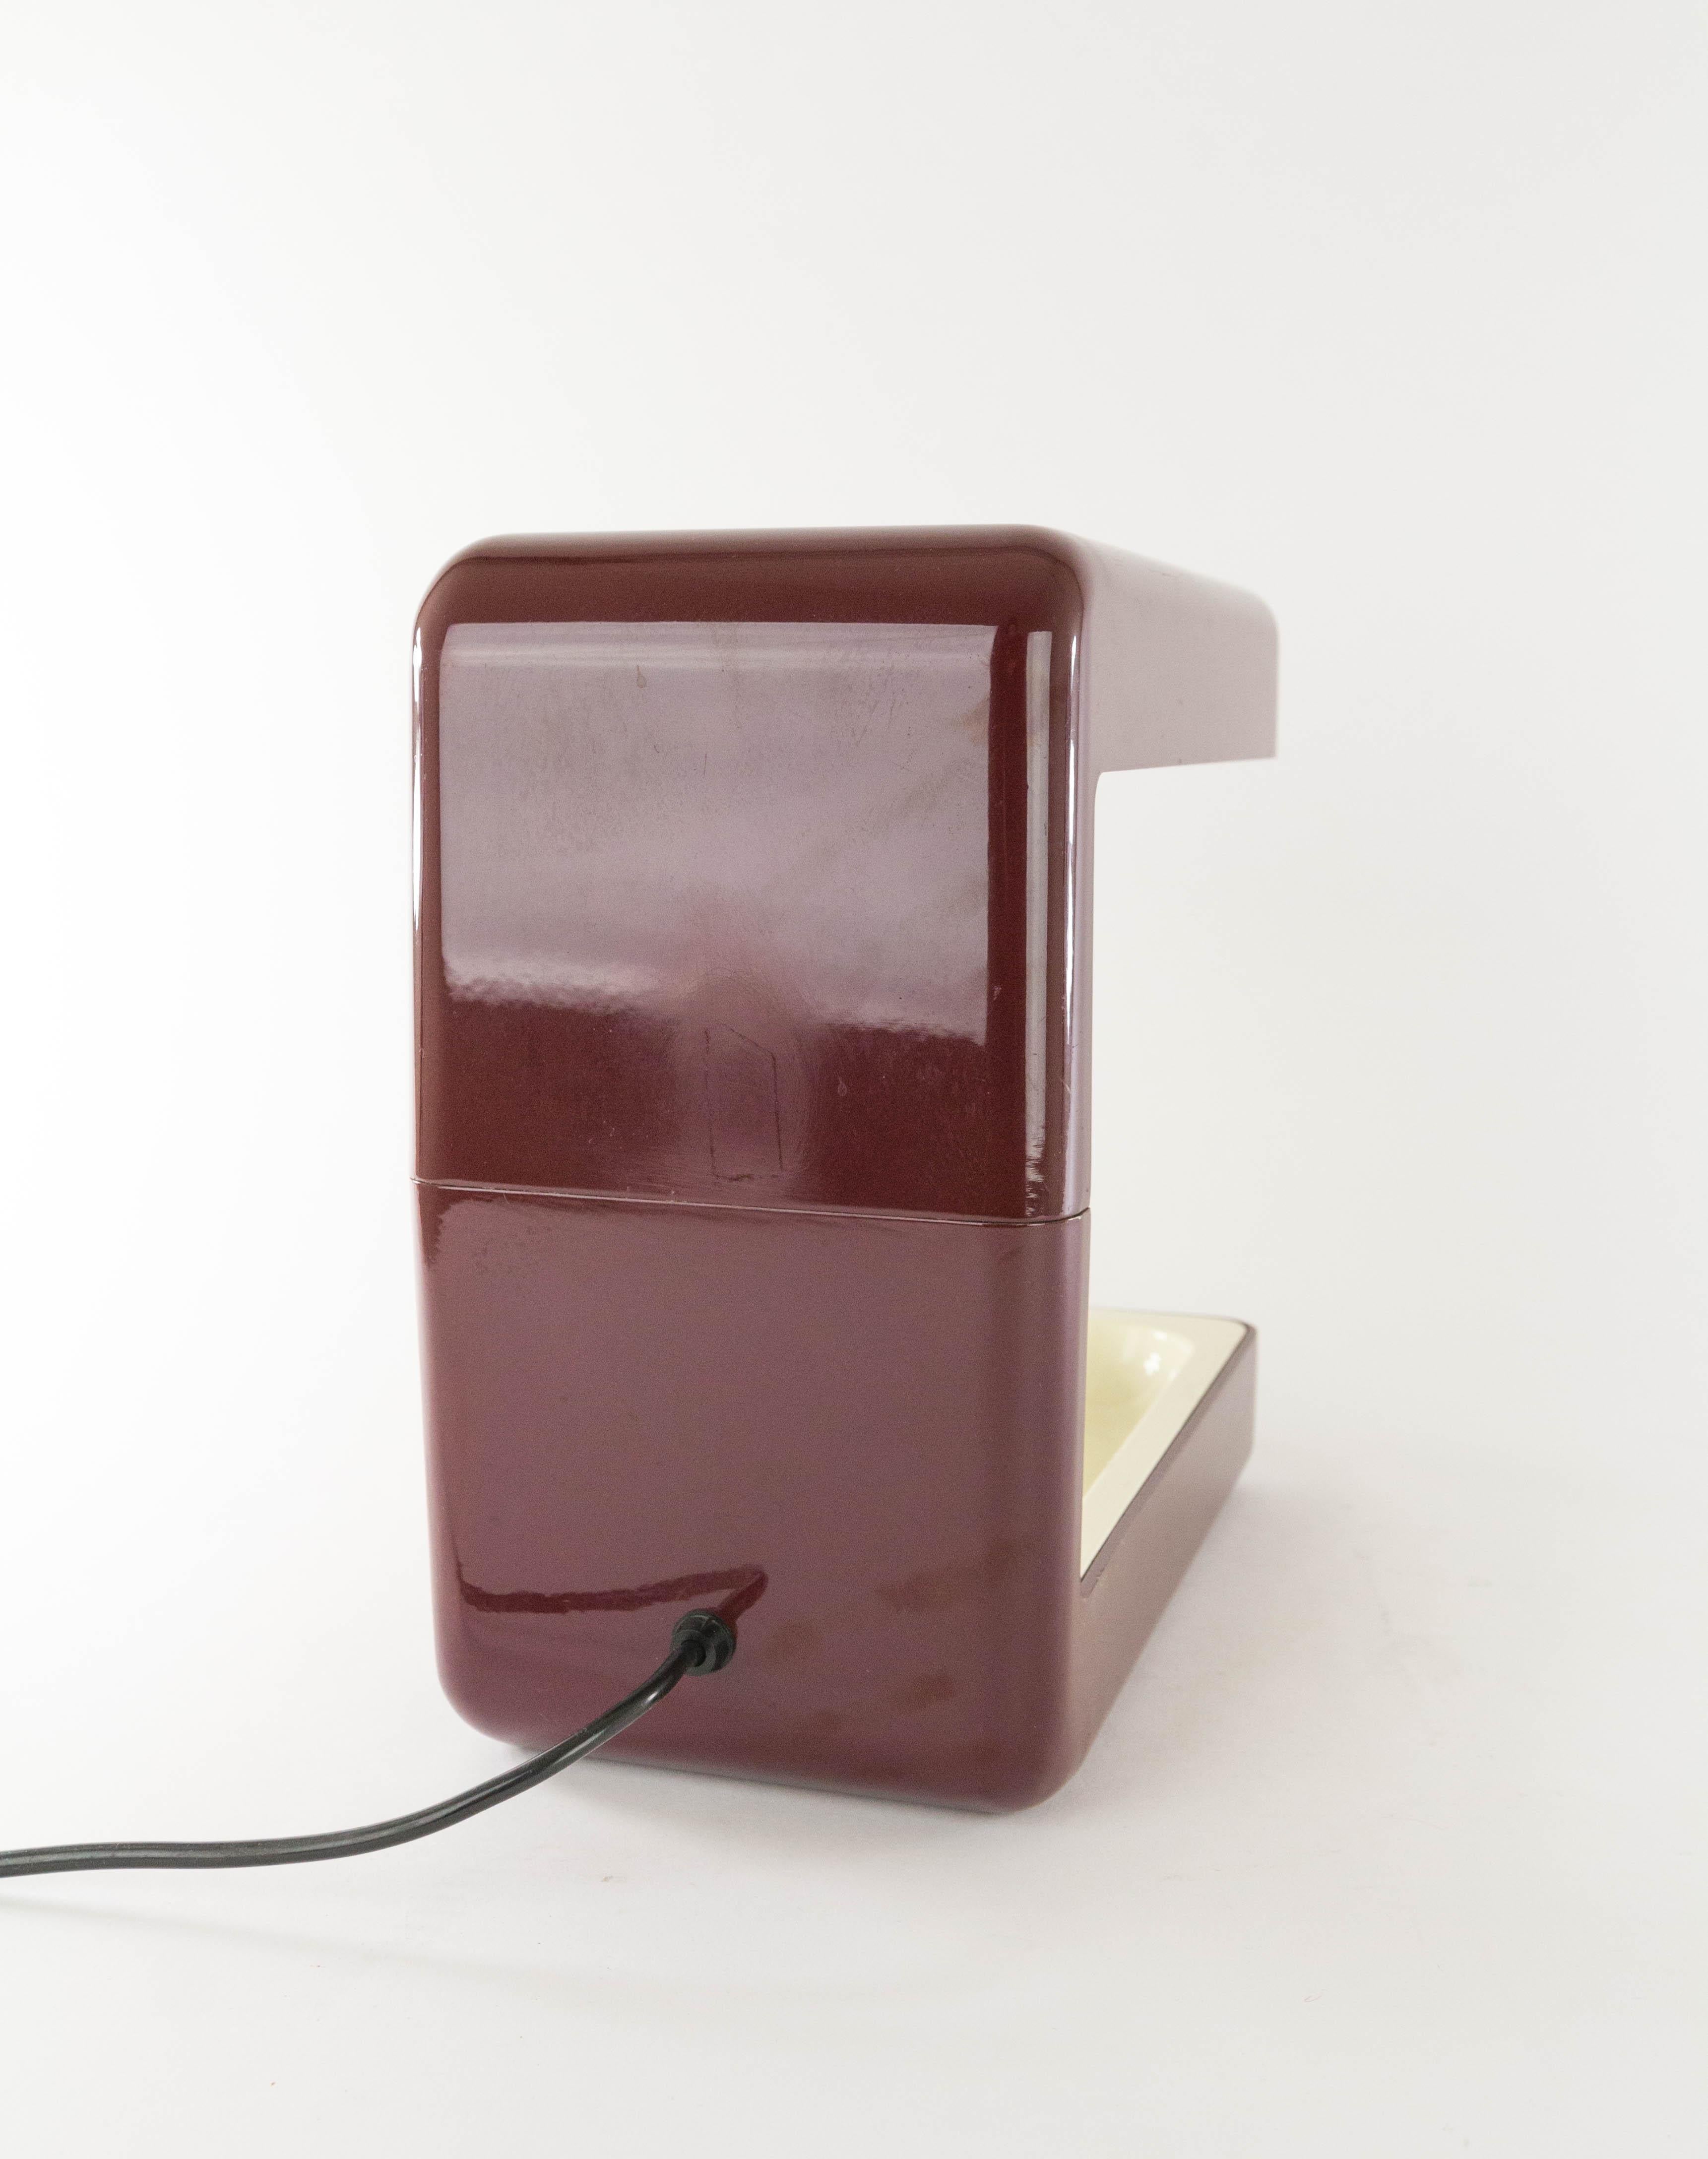 Isos Burgundy Desk Lamp by Giotto Stoppino for Tronconi, 1970s For Sale 3